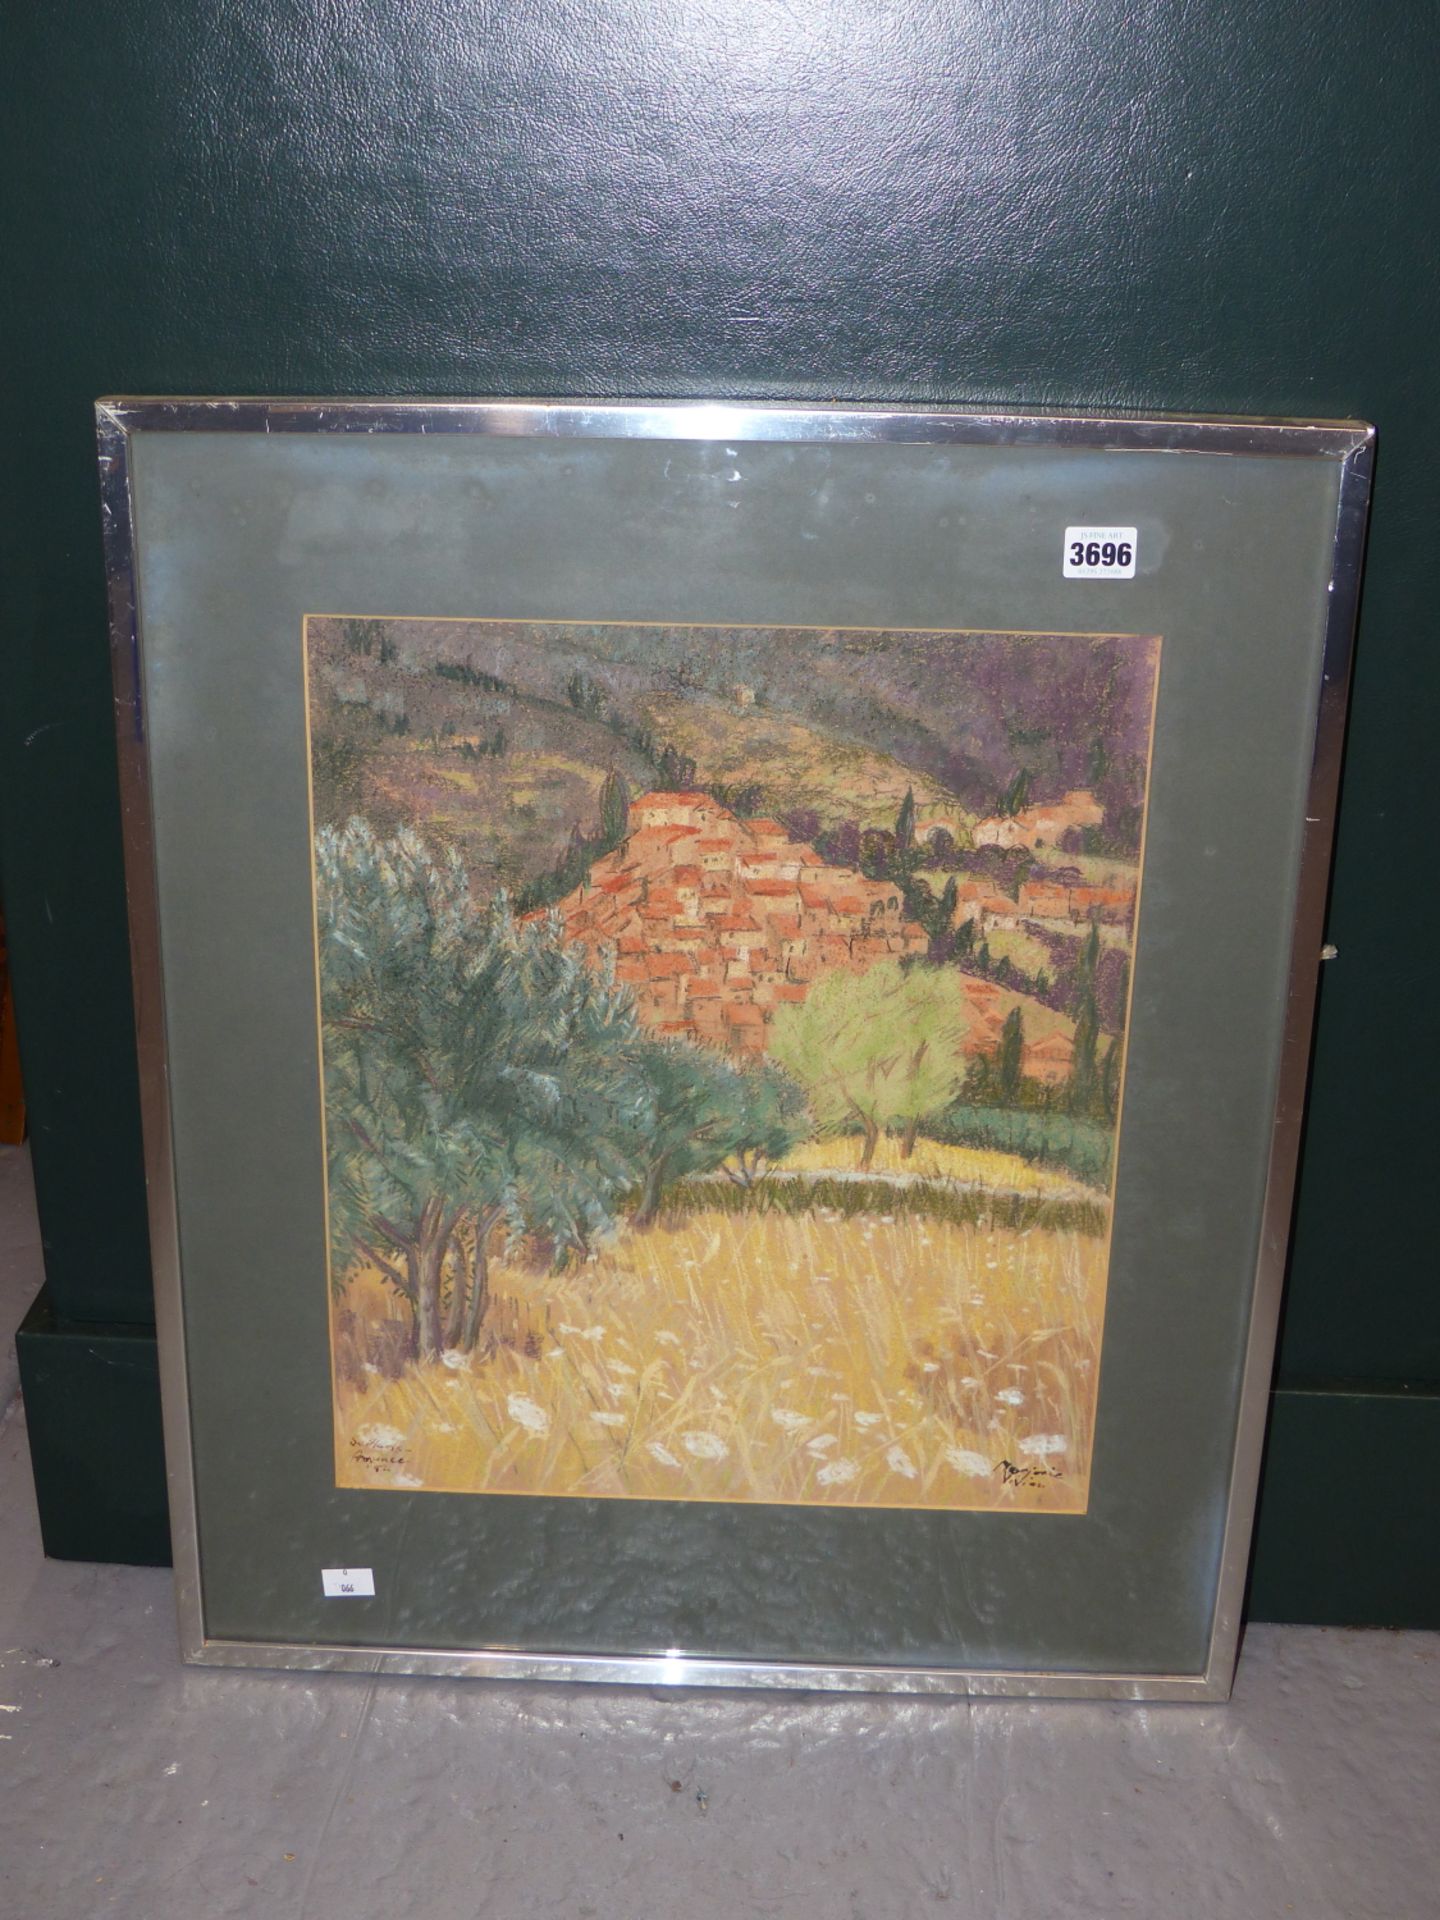 MARJORIE VIVIAN (20TH CENTURY) ARR. SEILLANS, PROVENCE. PASTEL. SIGNED AND TITLED, DATED '82. 38 X - Image 3 of 6